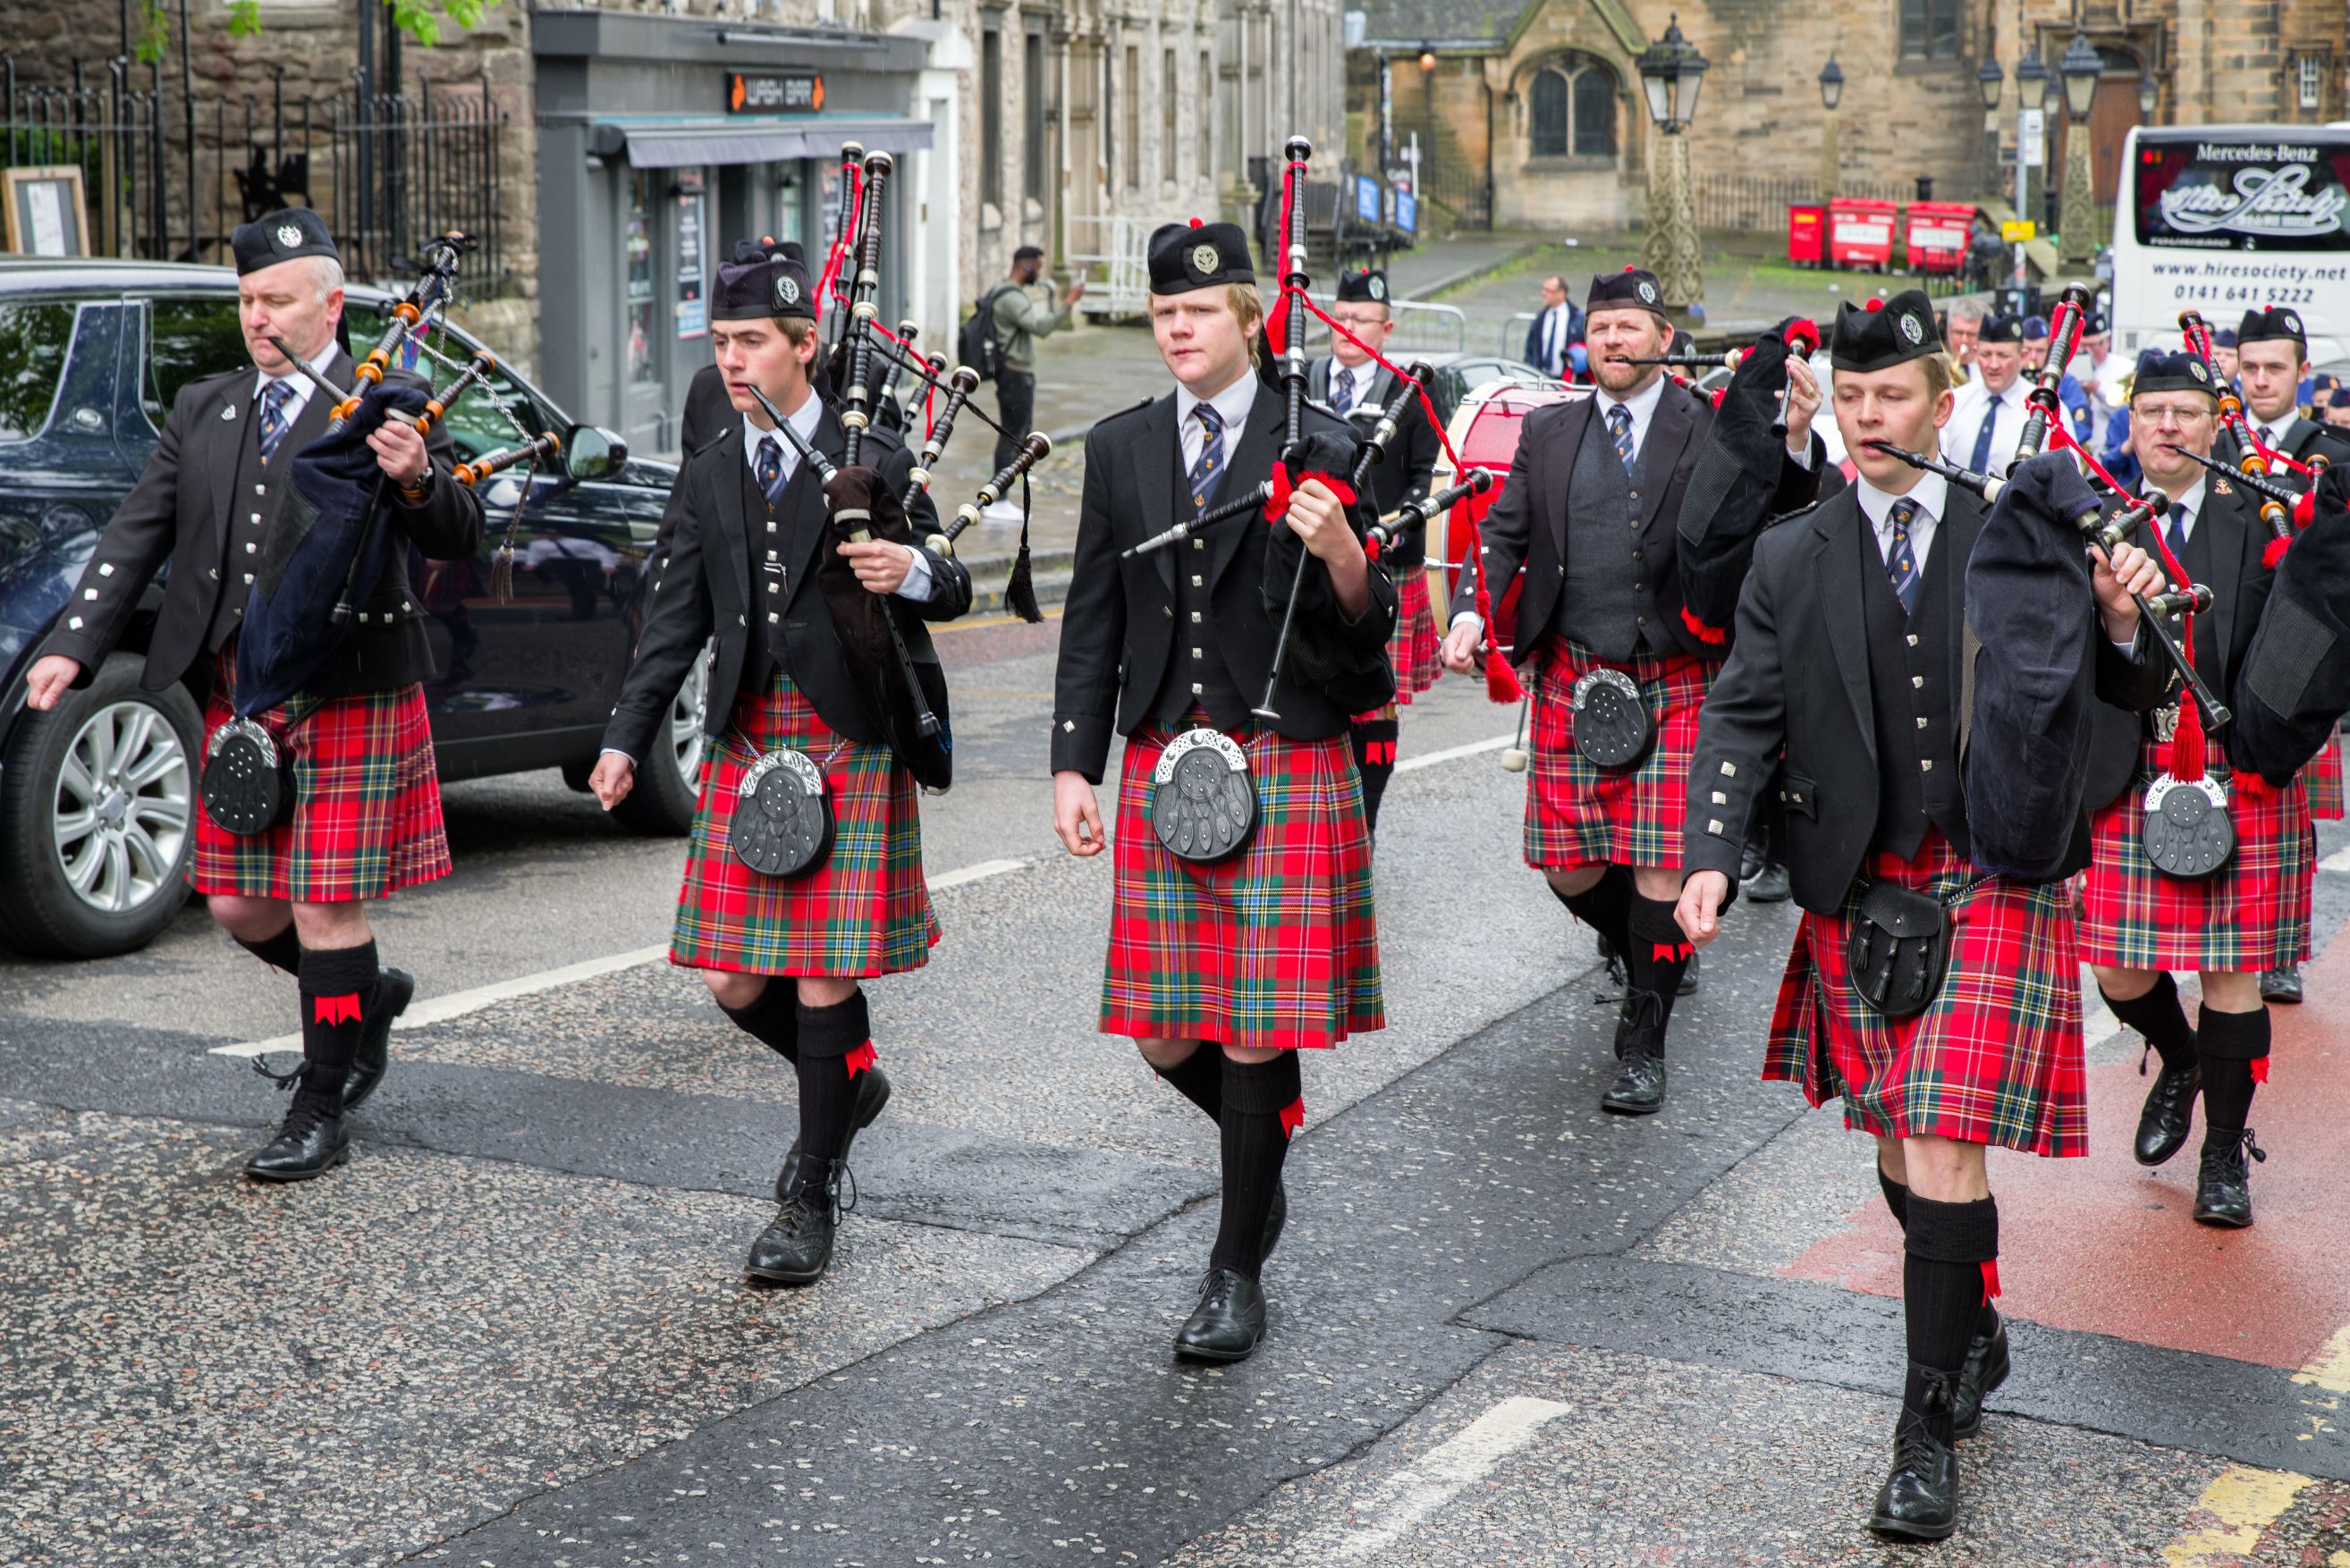 EDINBURGH, SCOTLAND - MAY 20: Ceremonial march of orchestra with bagpipes and kilts on May 20, 2018 in Edinburgh